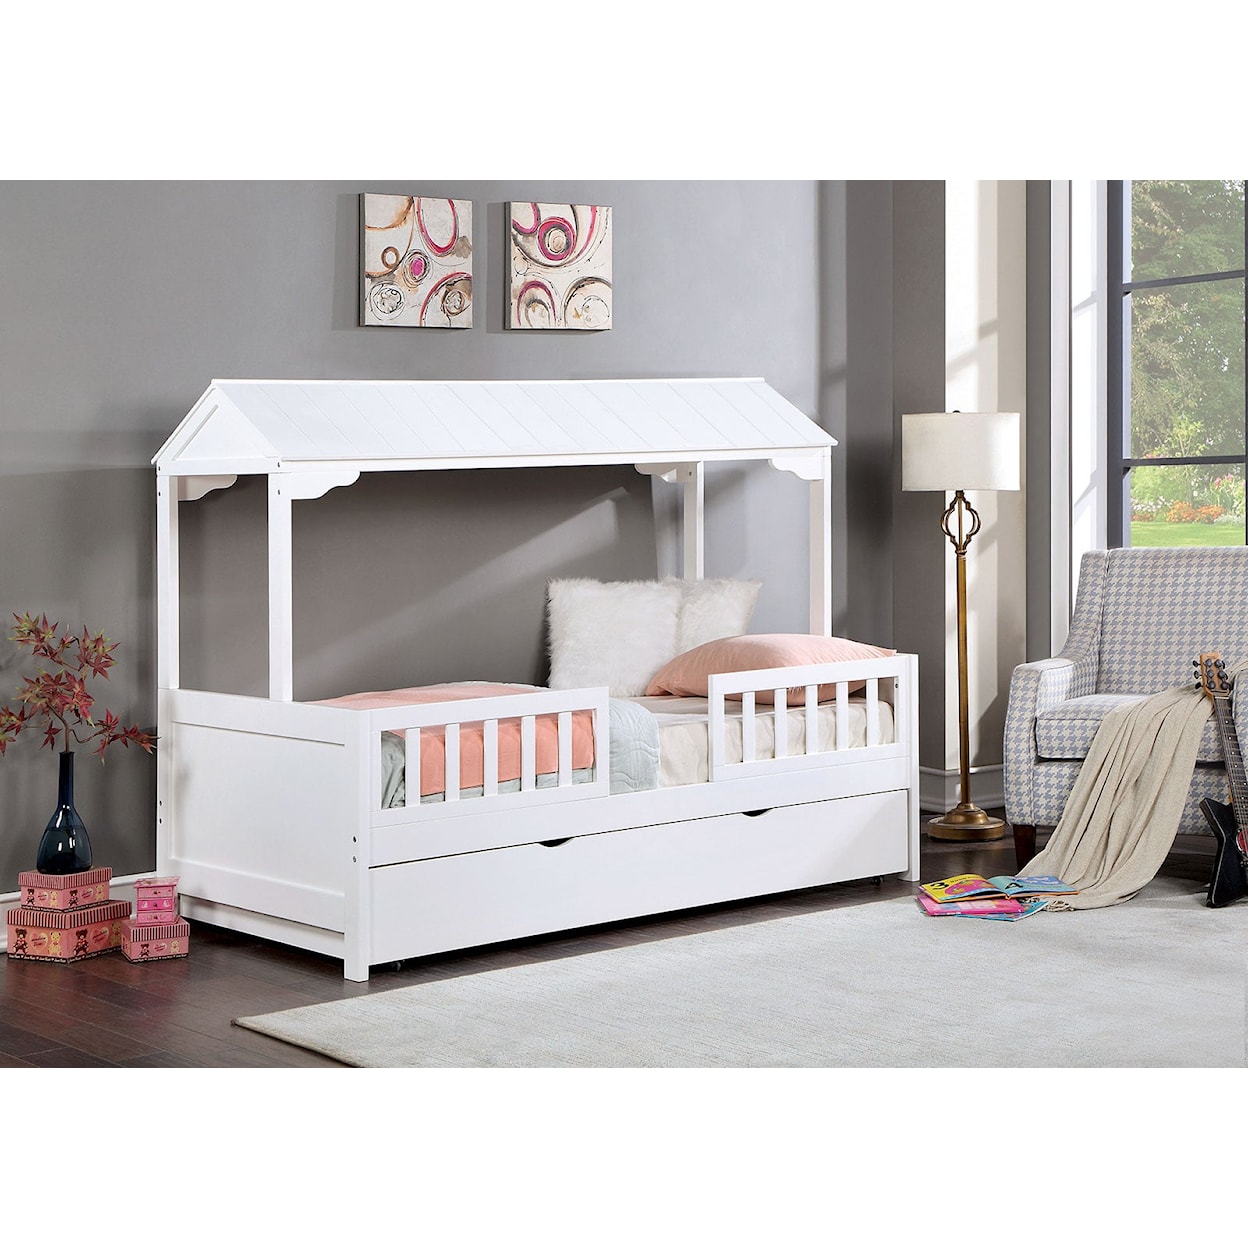 Furniture of America KIDWELLY Twin Bed w/ Trundle